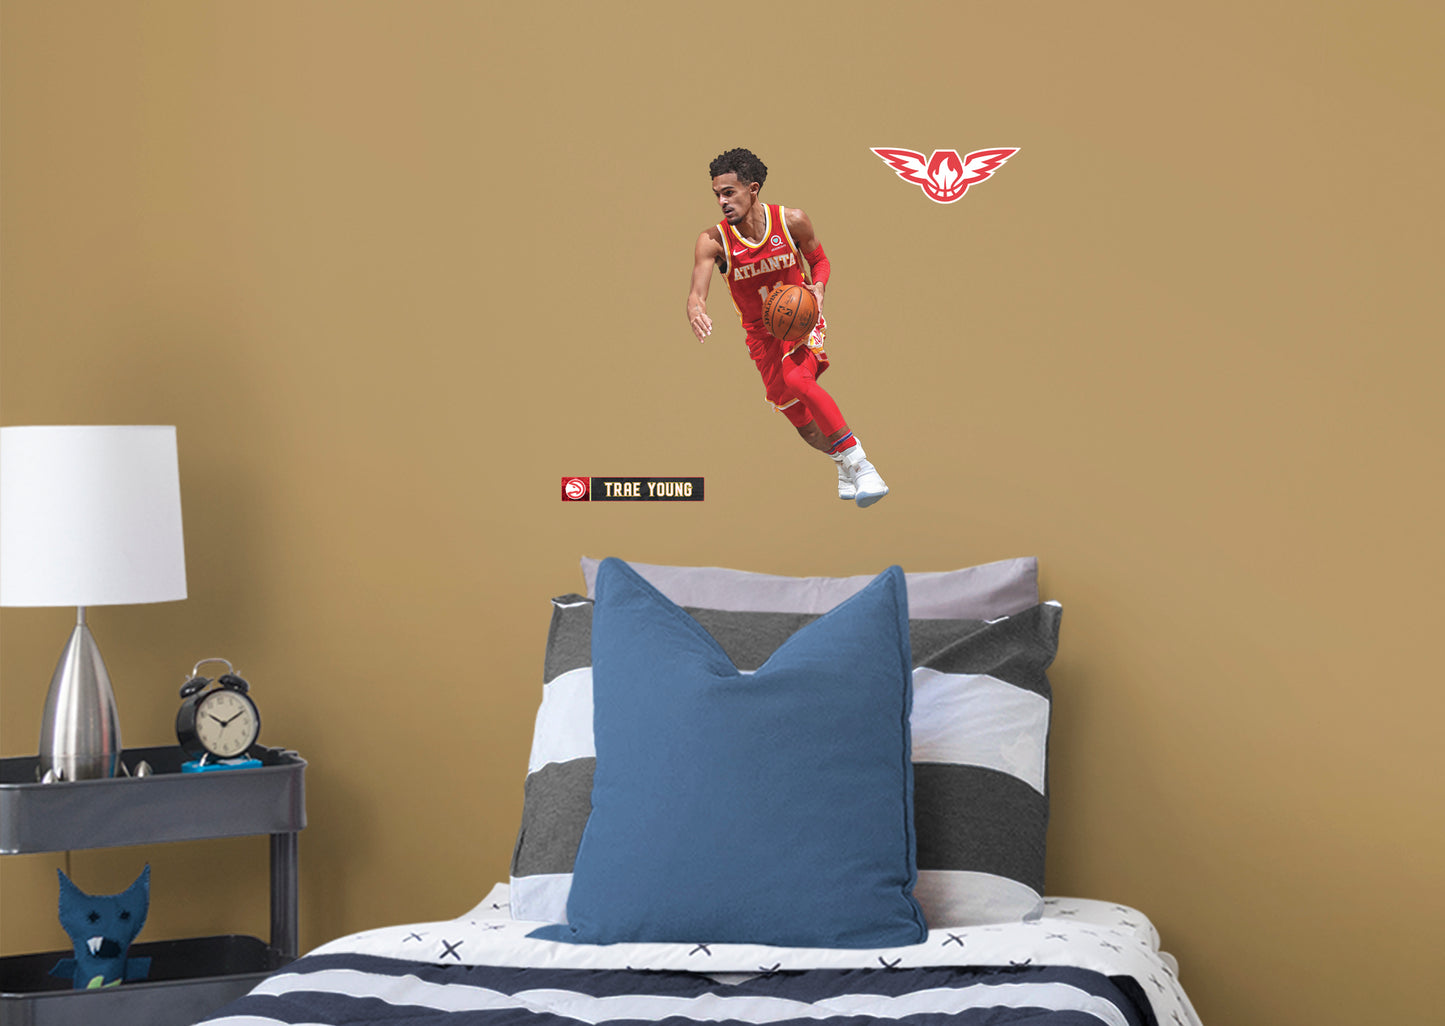 Atlanta Hawks Trae Young  Red Jersey        - Officially Licensed NBA Removable Wall   Adhesive Decal